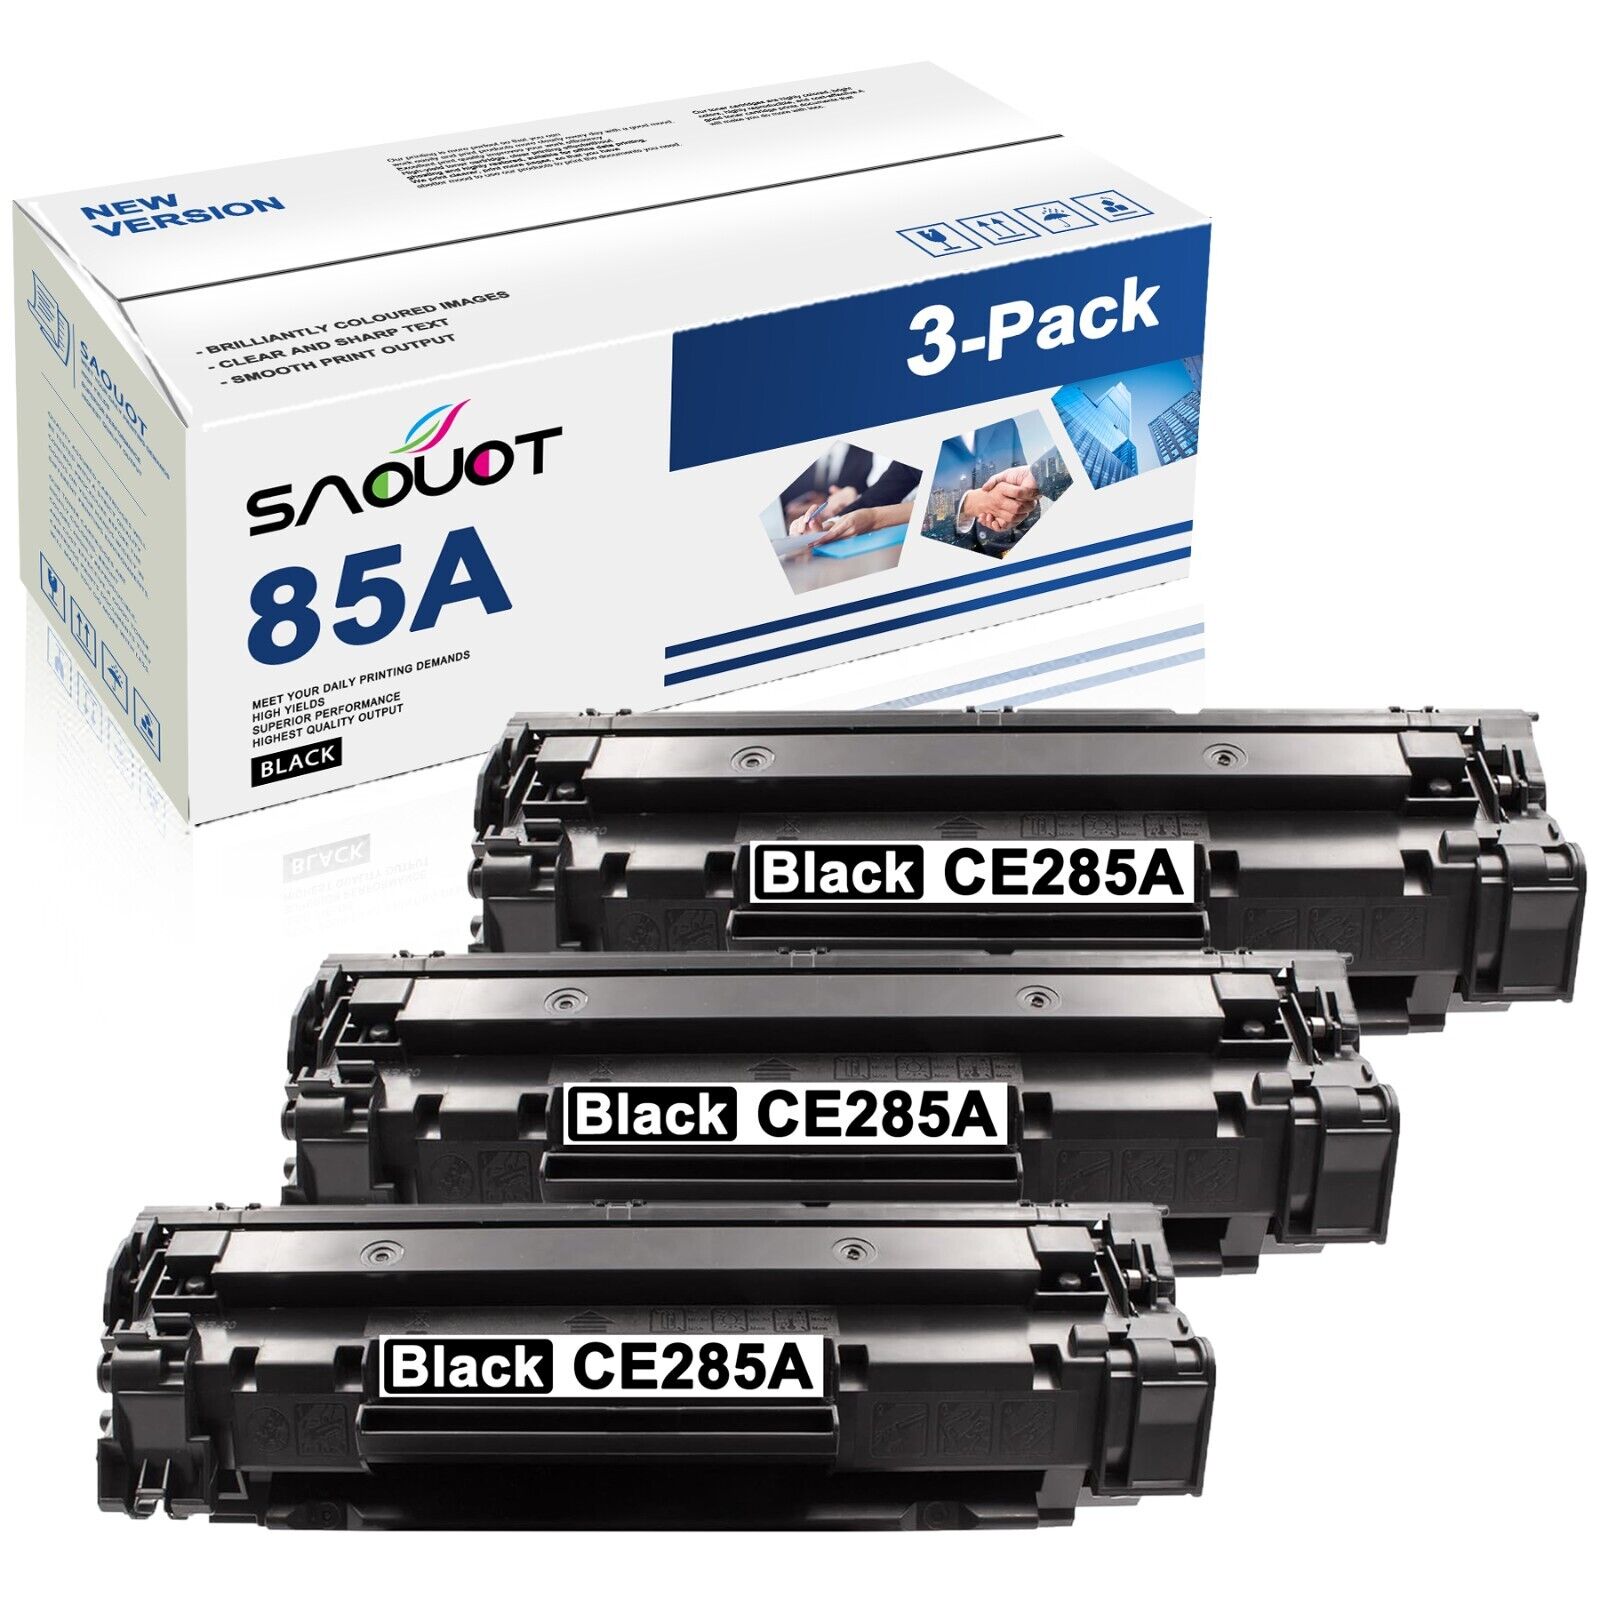 85A brand new Toner CE285A Cartridge Replacement for HP Black Pro P1102w P1109w